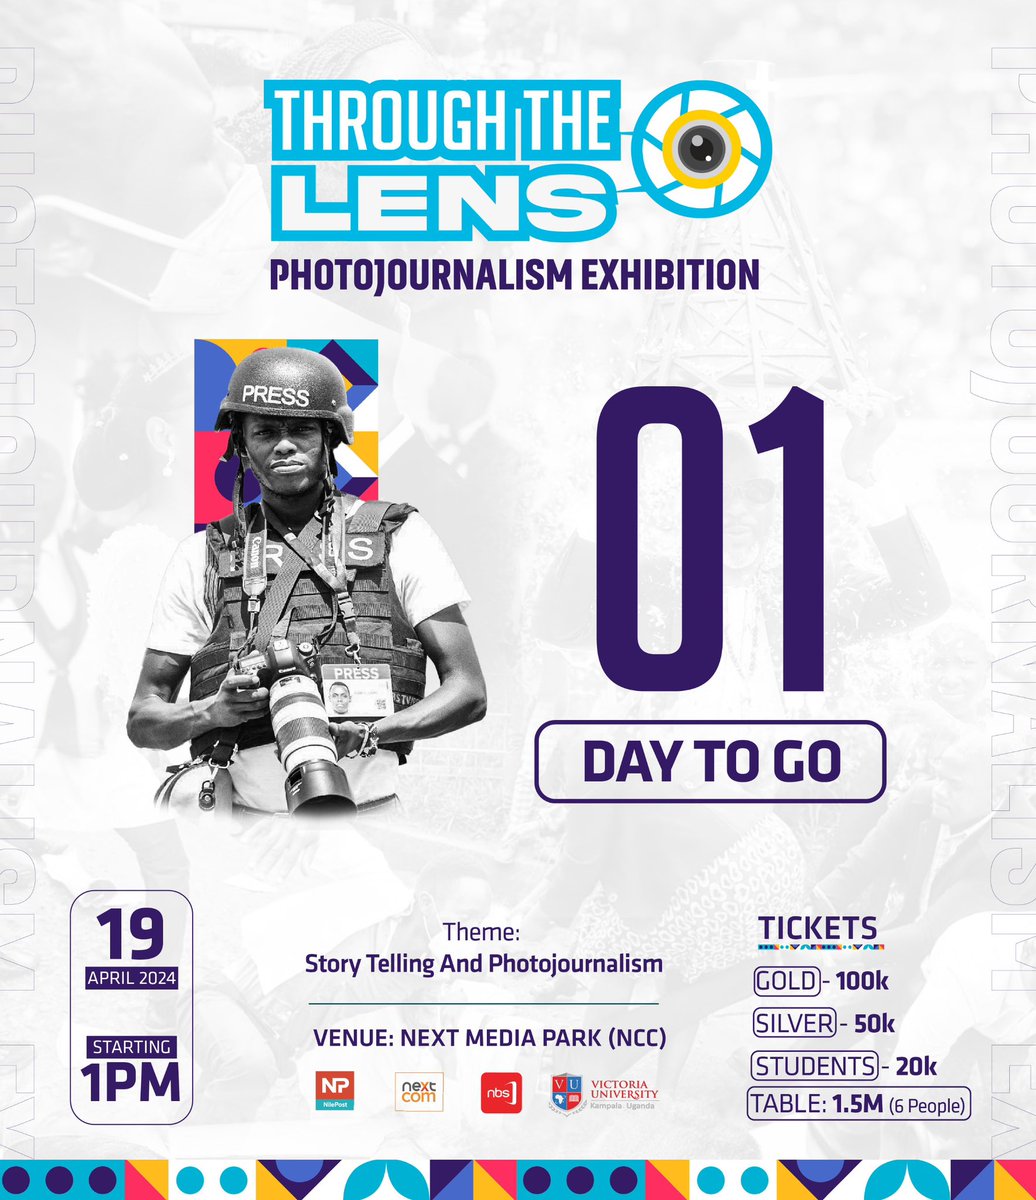 Ladies and Gentlemen, The day is tomorrow 🙏. Let's celebrate Photojournalism together ❤️👏 #ThroughTheLensUg